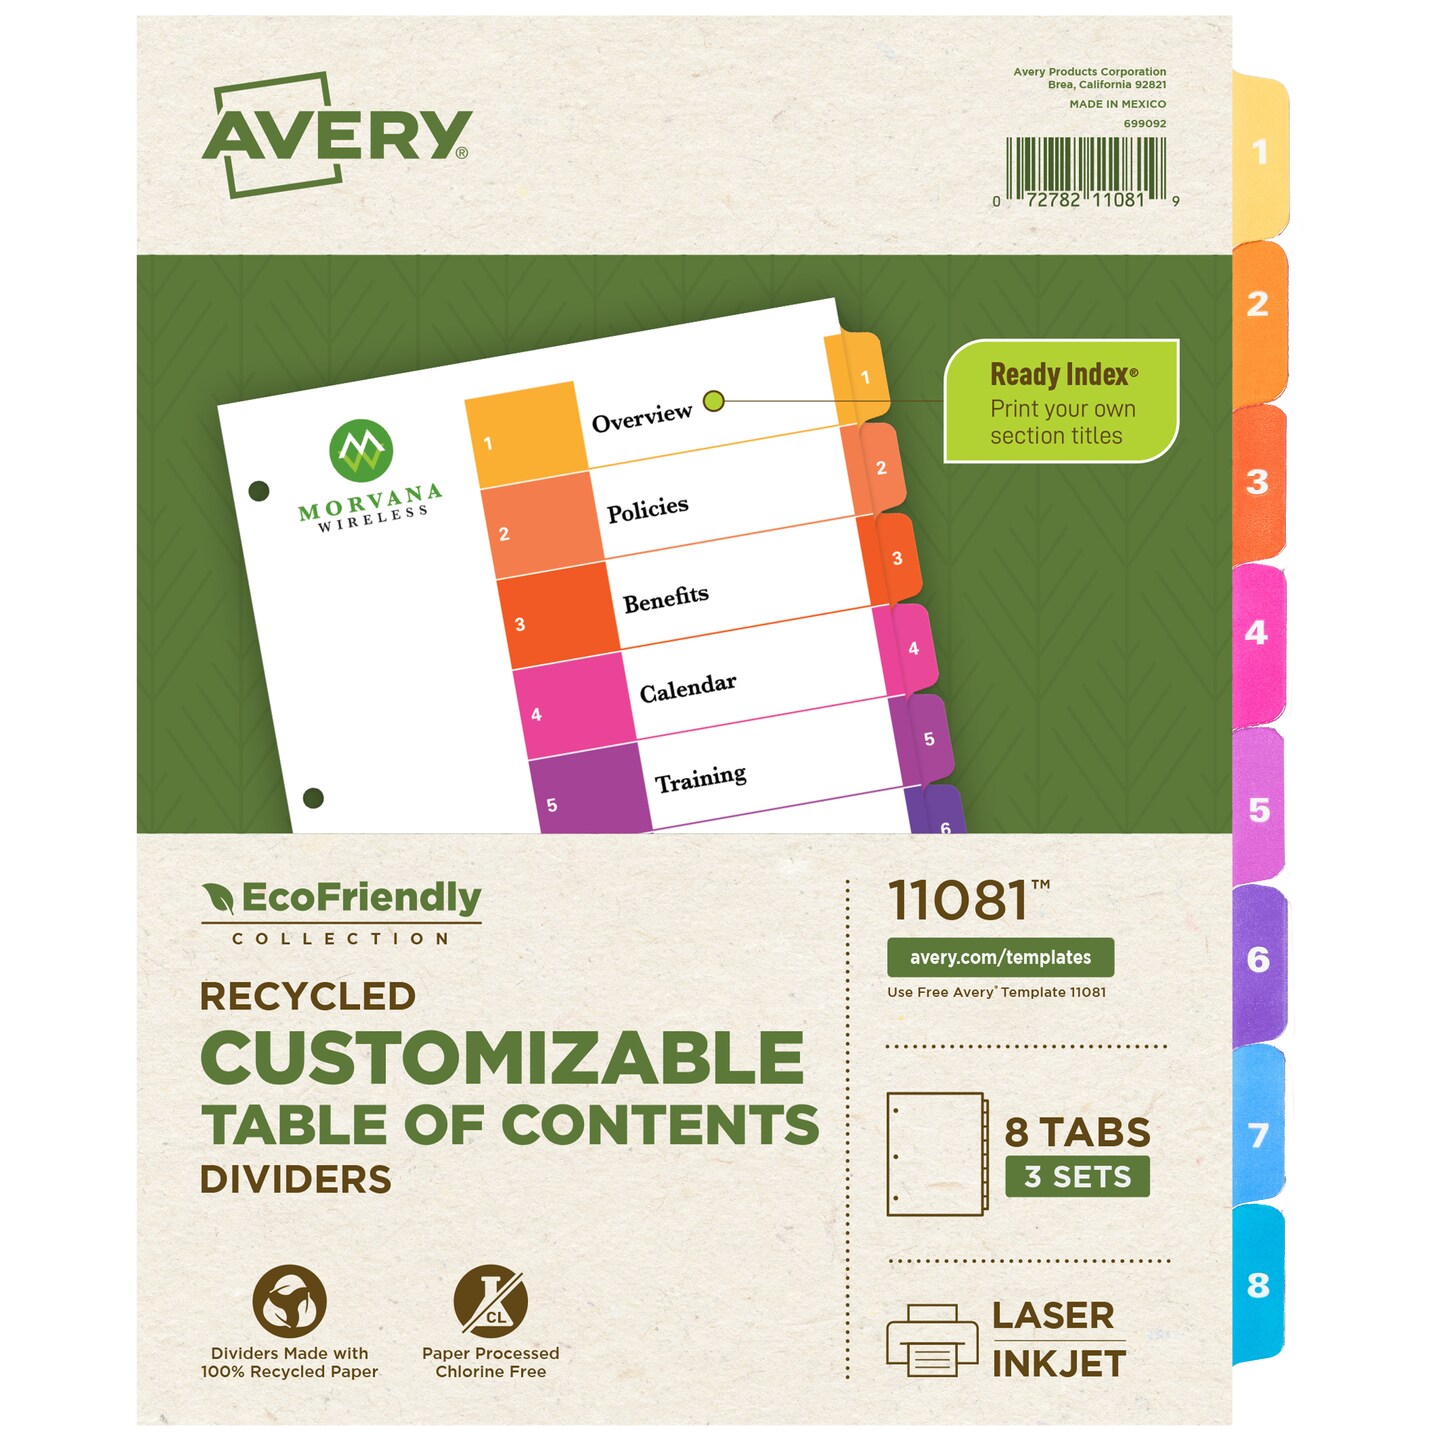 Avery EcoFriendly Recycled Dividers for 3 Ring Binders, 8-Tab, Multicolor Tabs, Ready Index Customizable Table of Contents, 3 Sets for 24 Binder Dividers Total (11081)